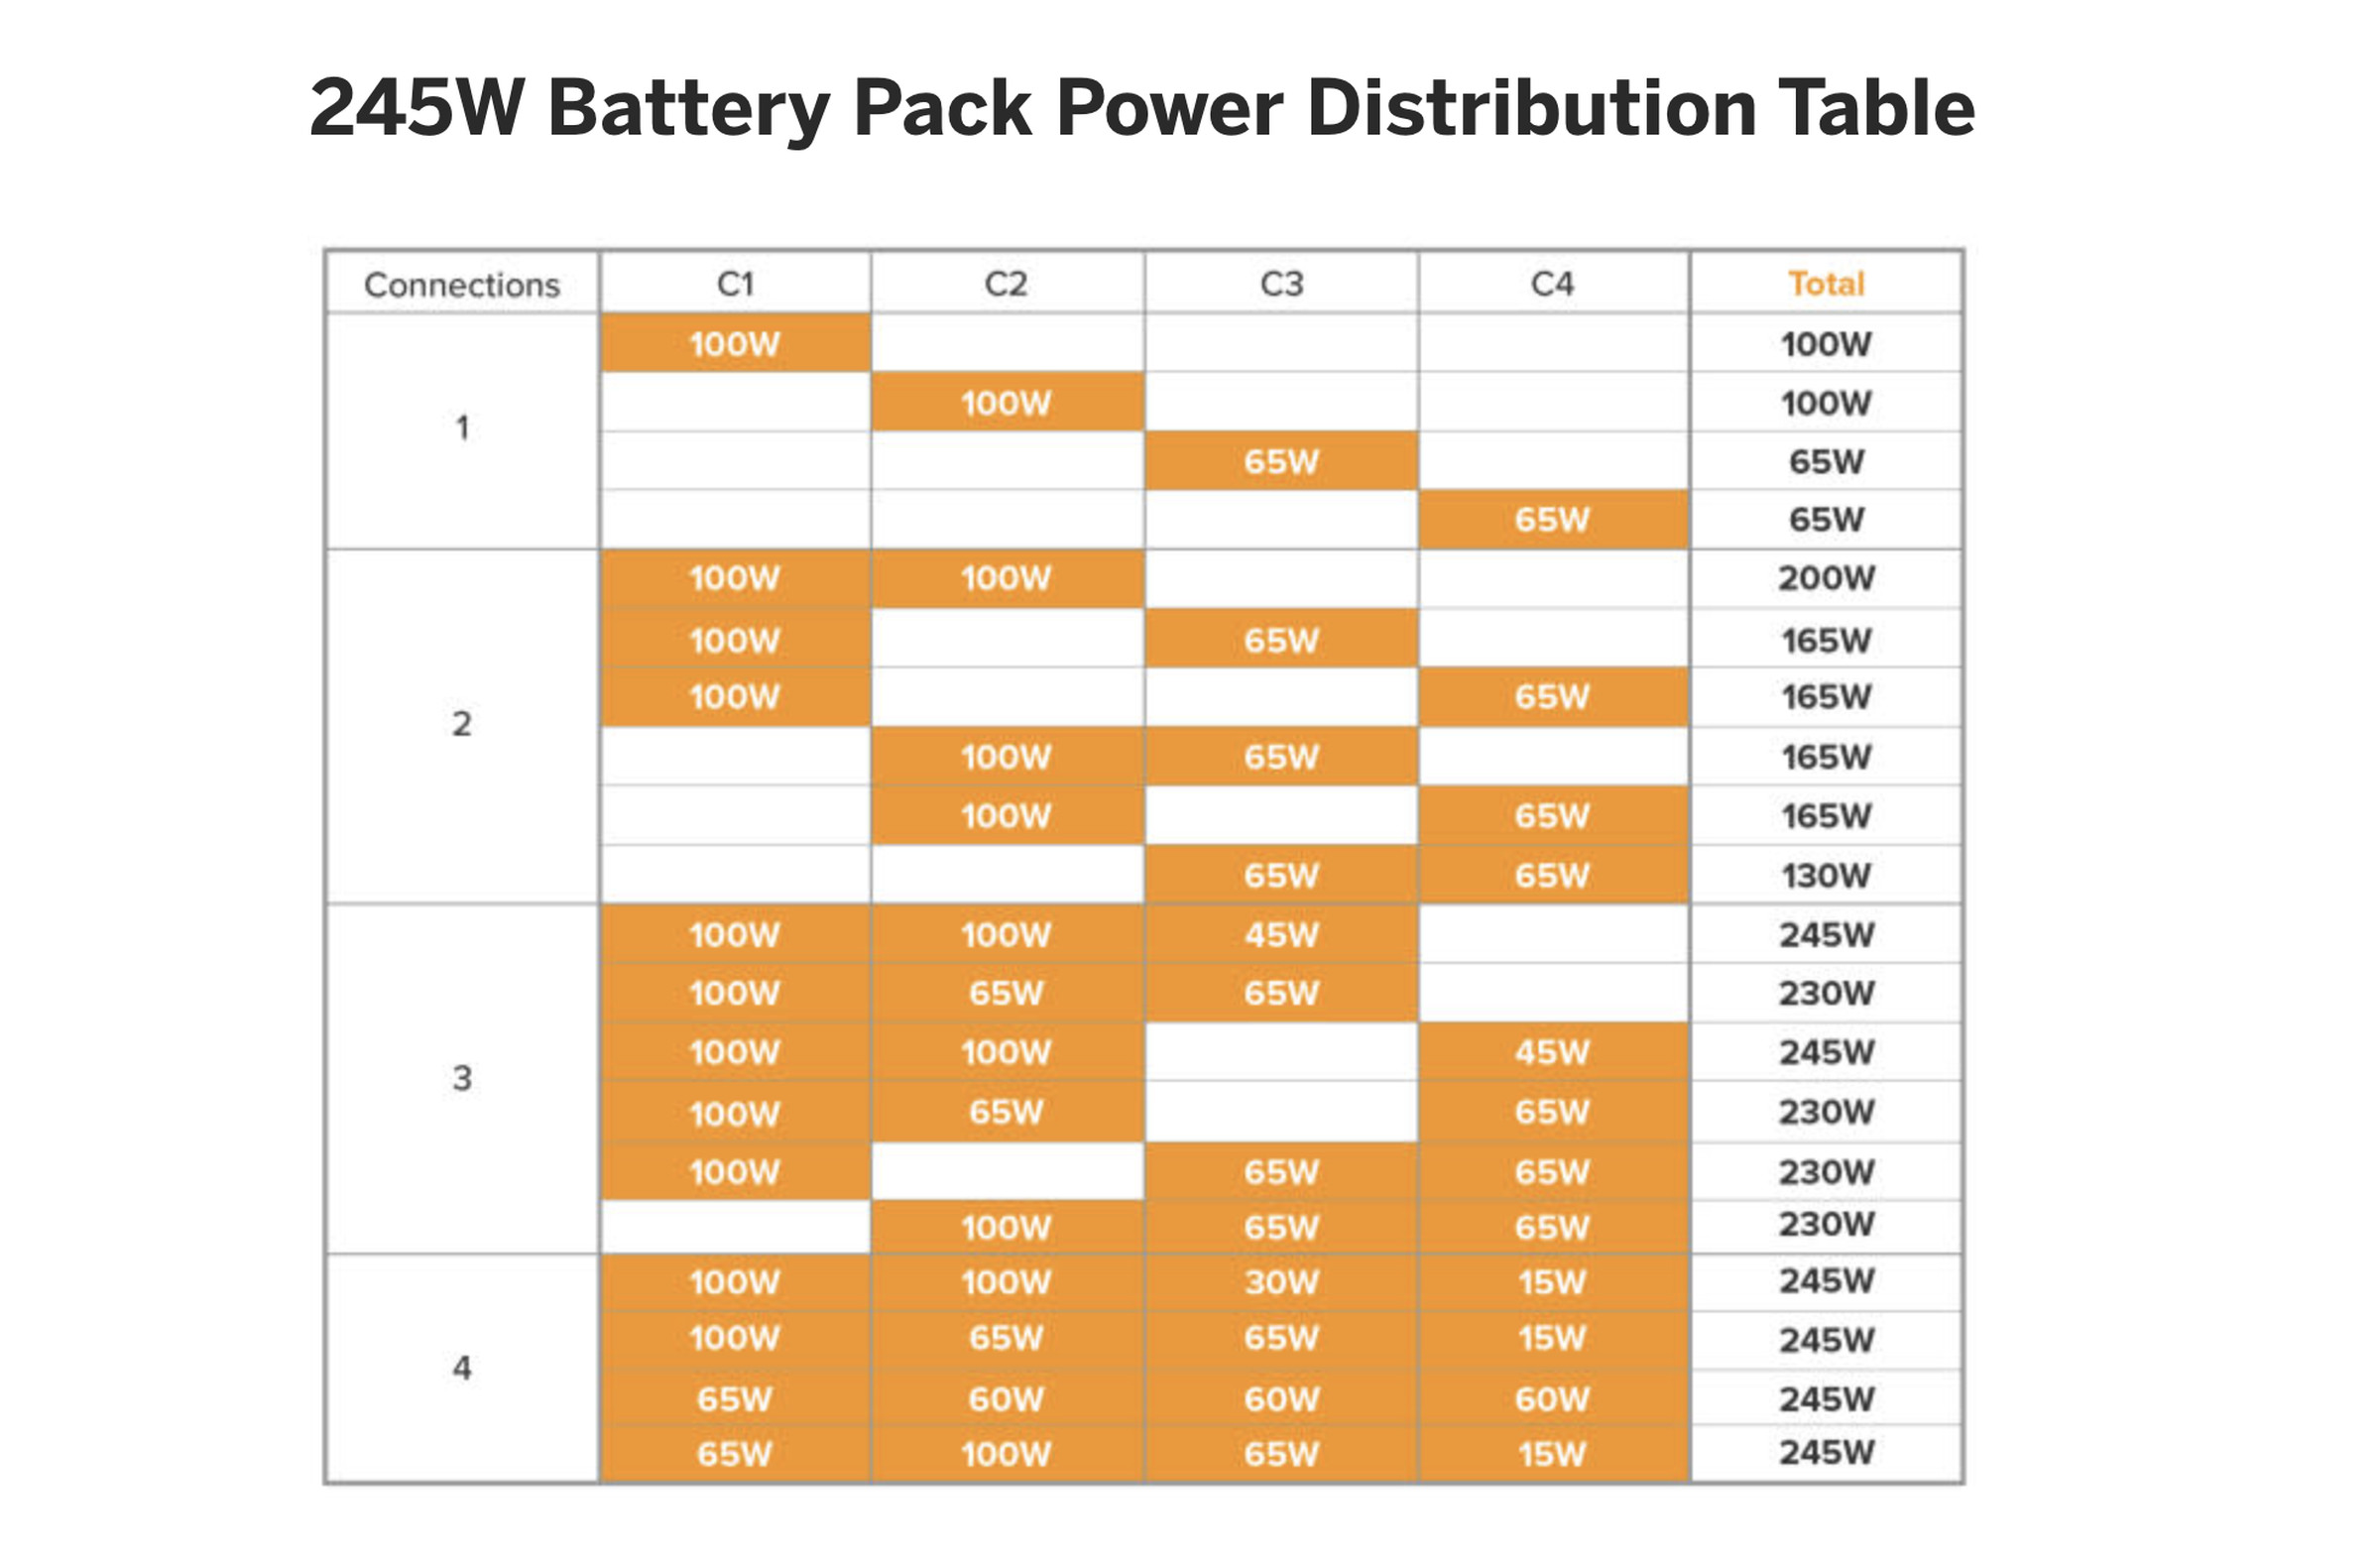 A breakdown of charging speeds for the 245W battery pack.